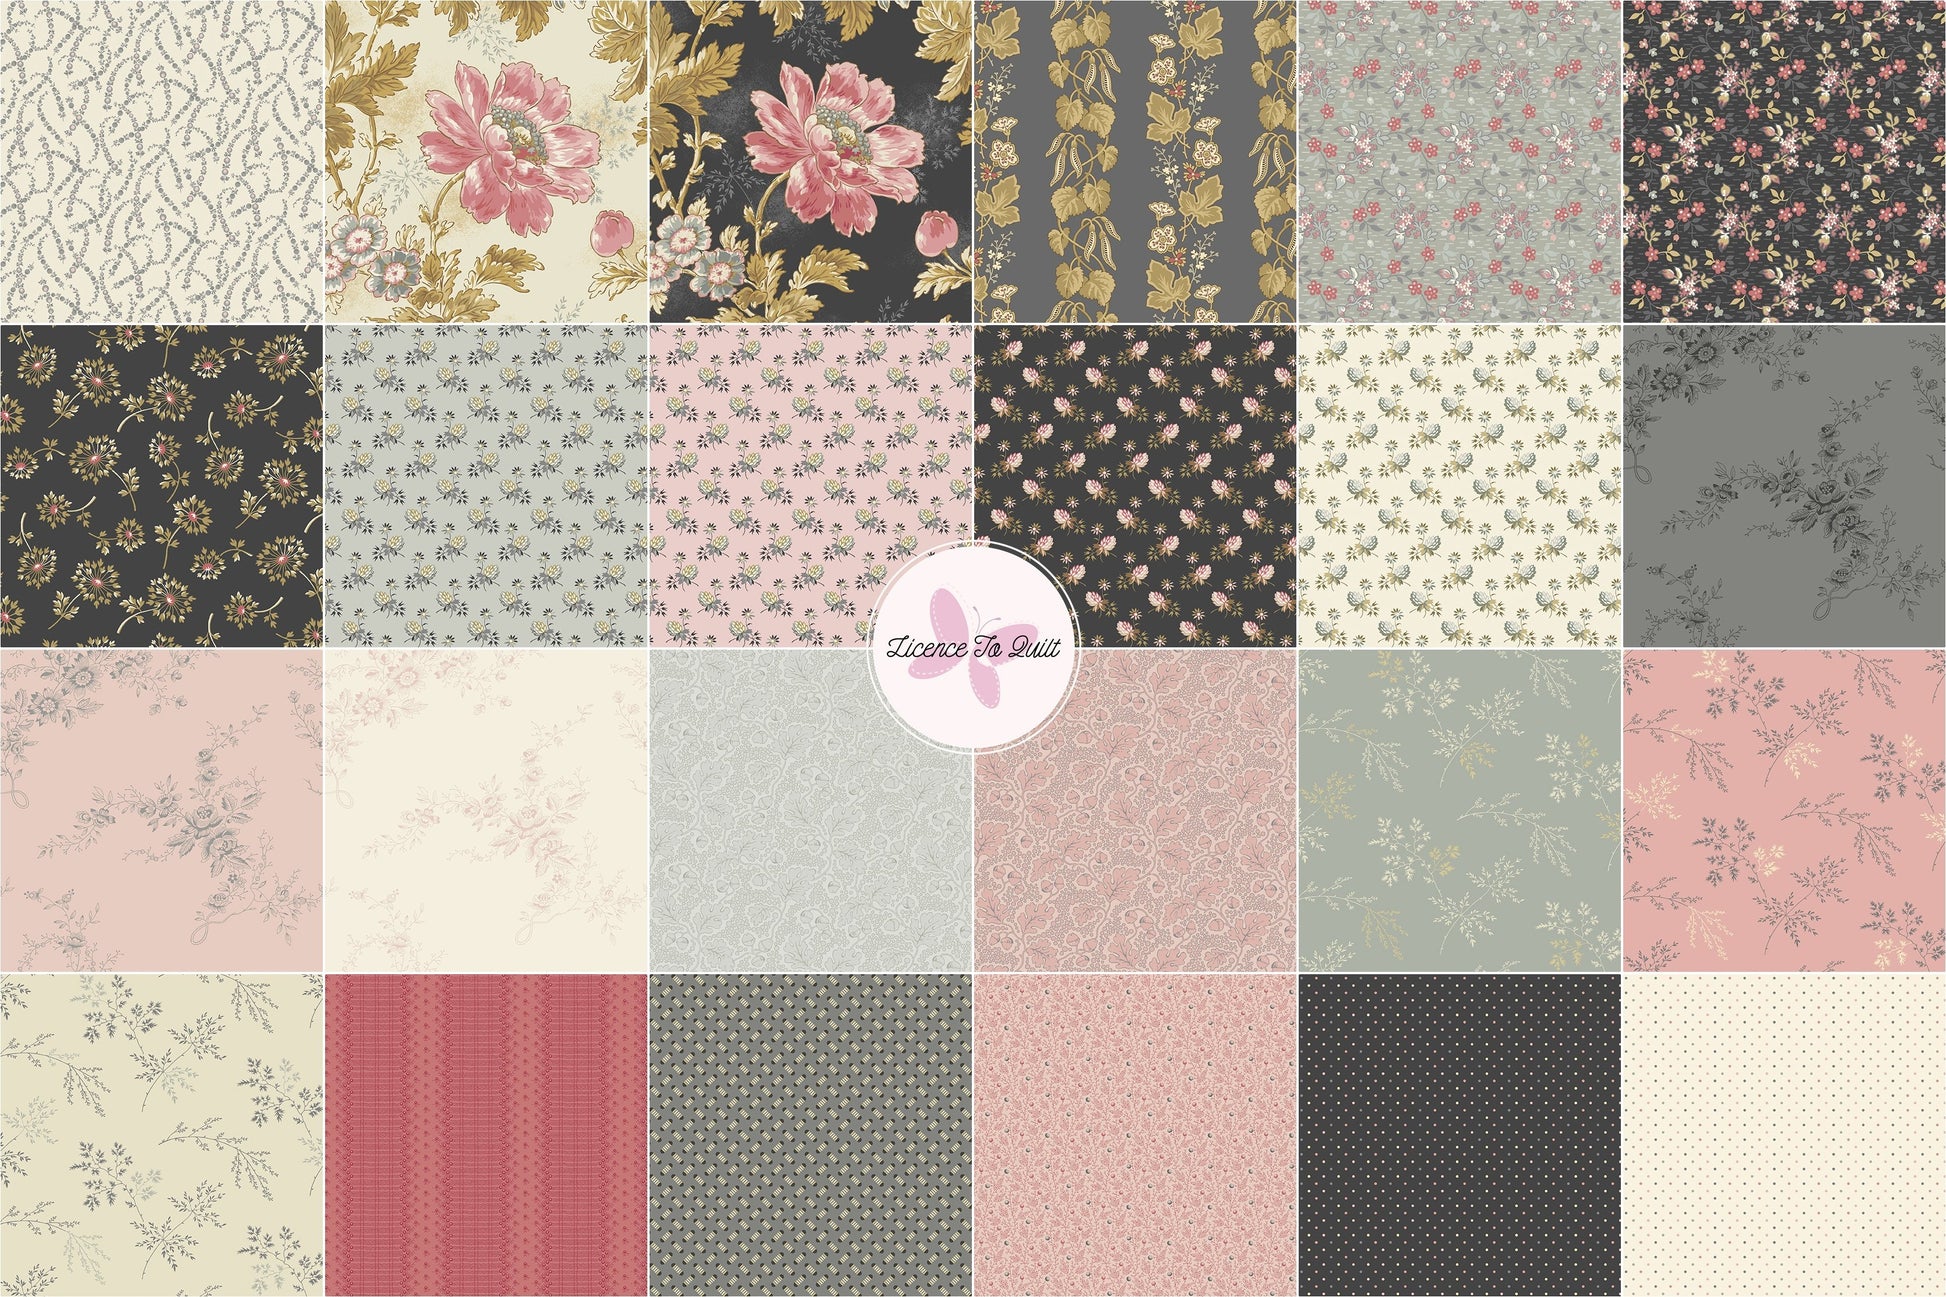 Moonstone - Powder Pink Bells of Ireland - Licence To Quilt